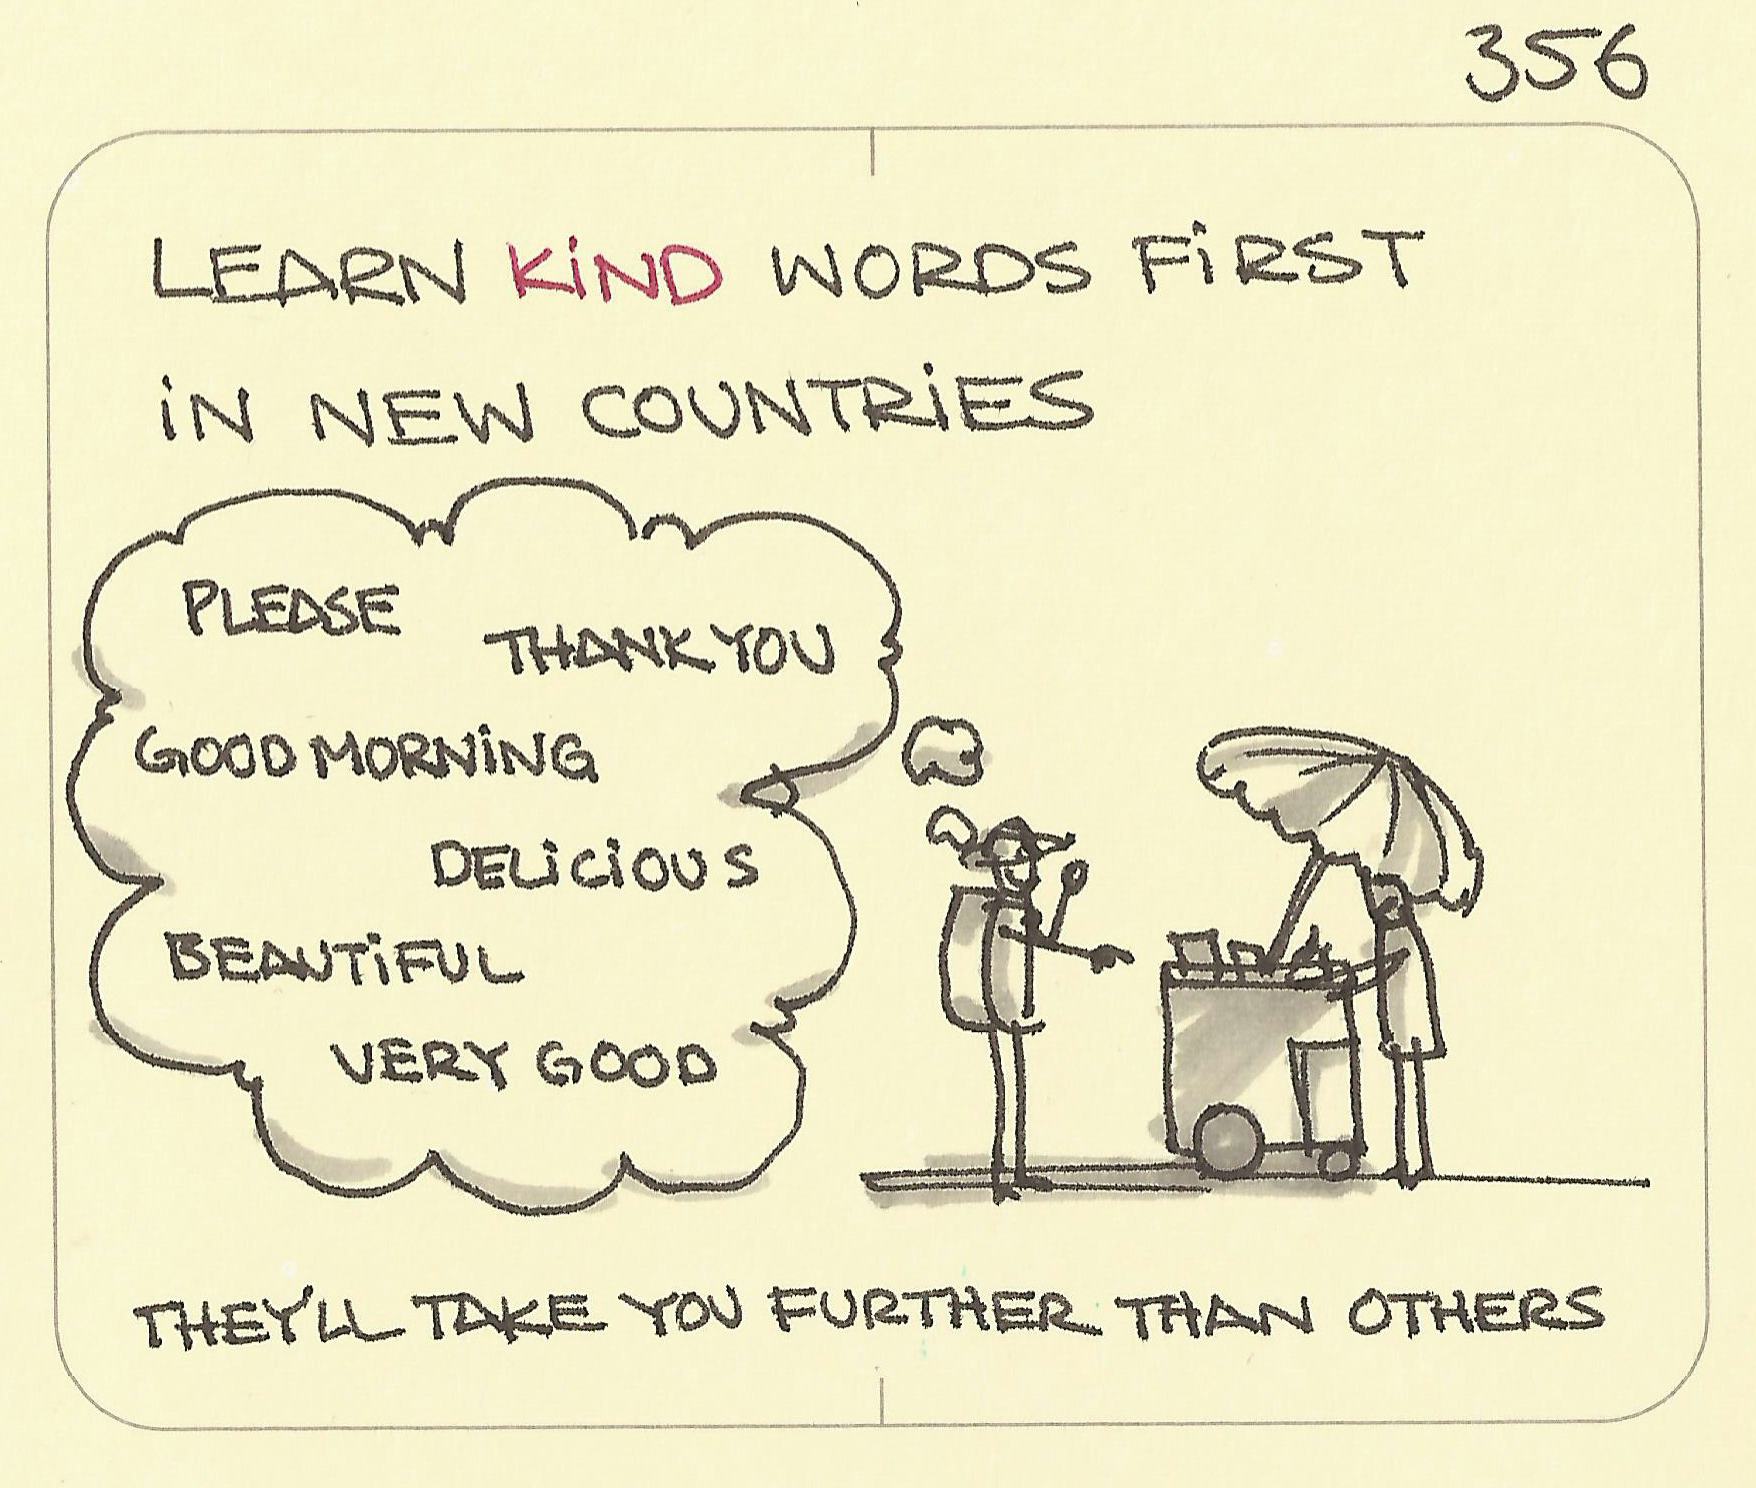 Learn kind words first in new countries - Sketchplanations